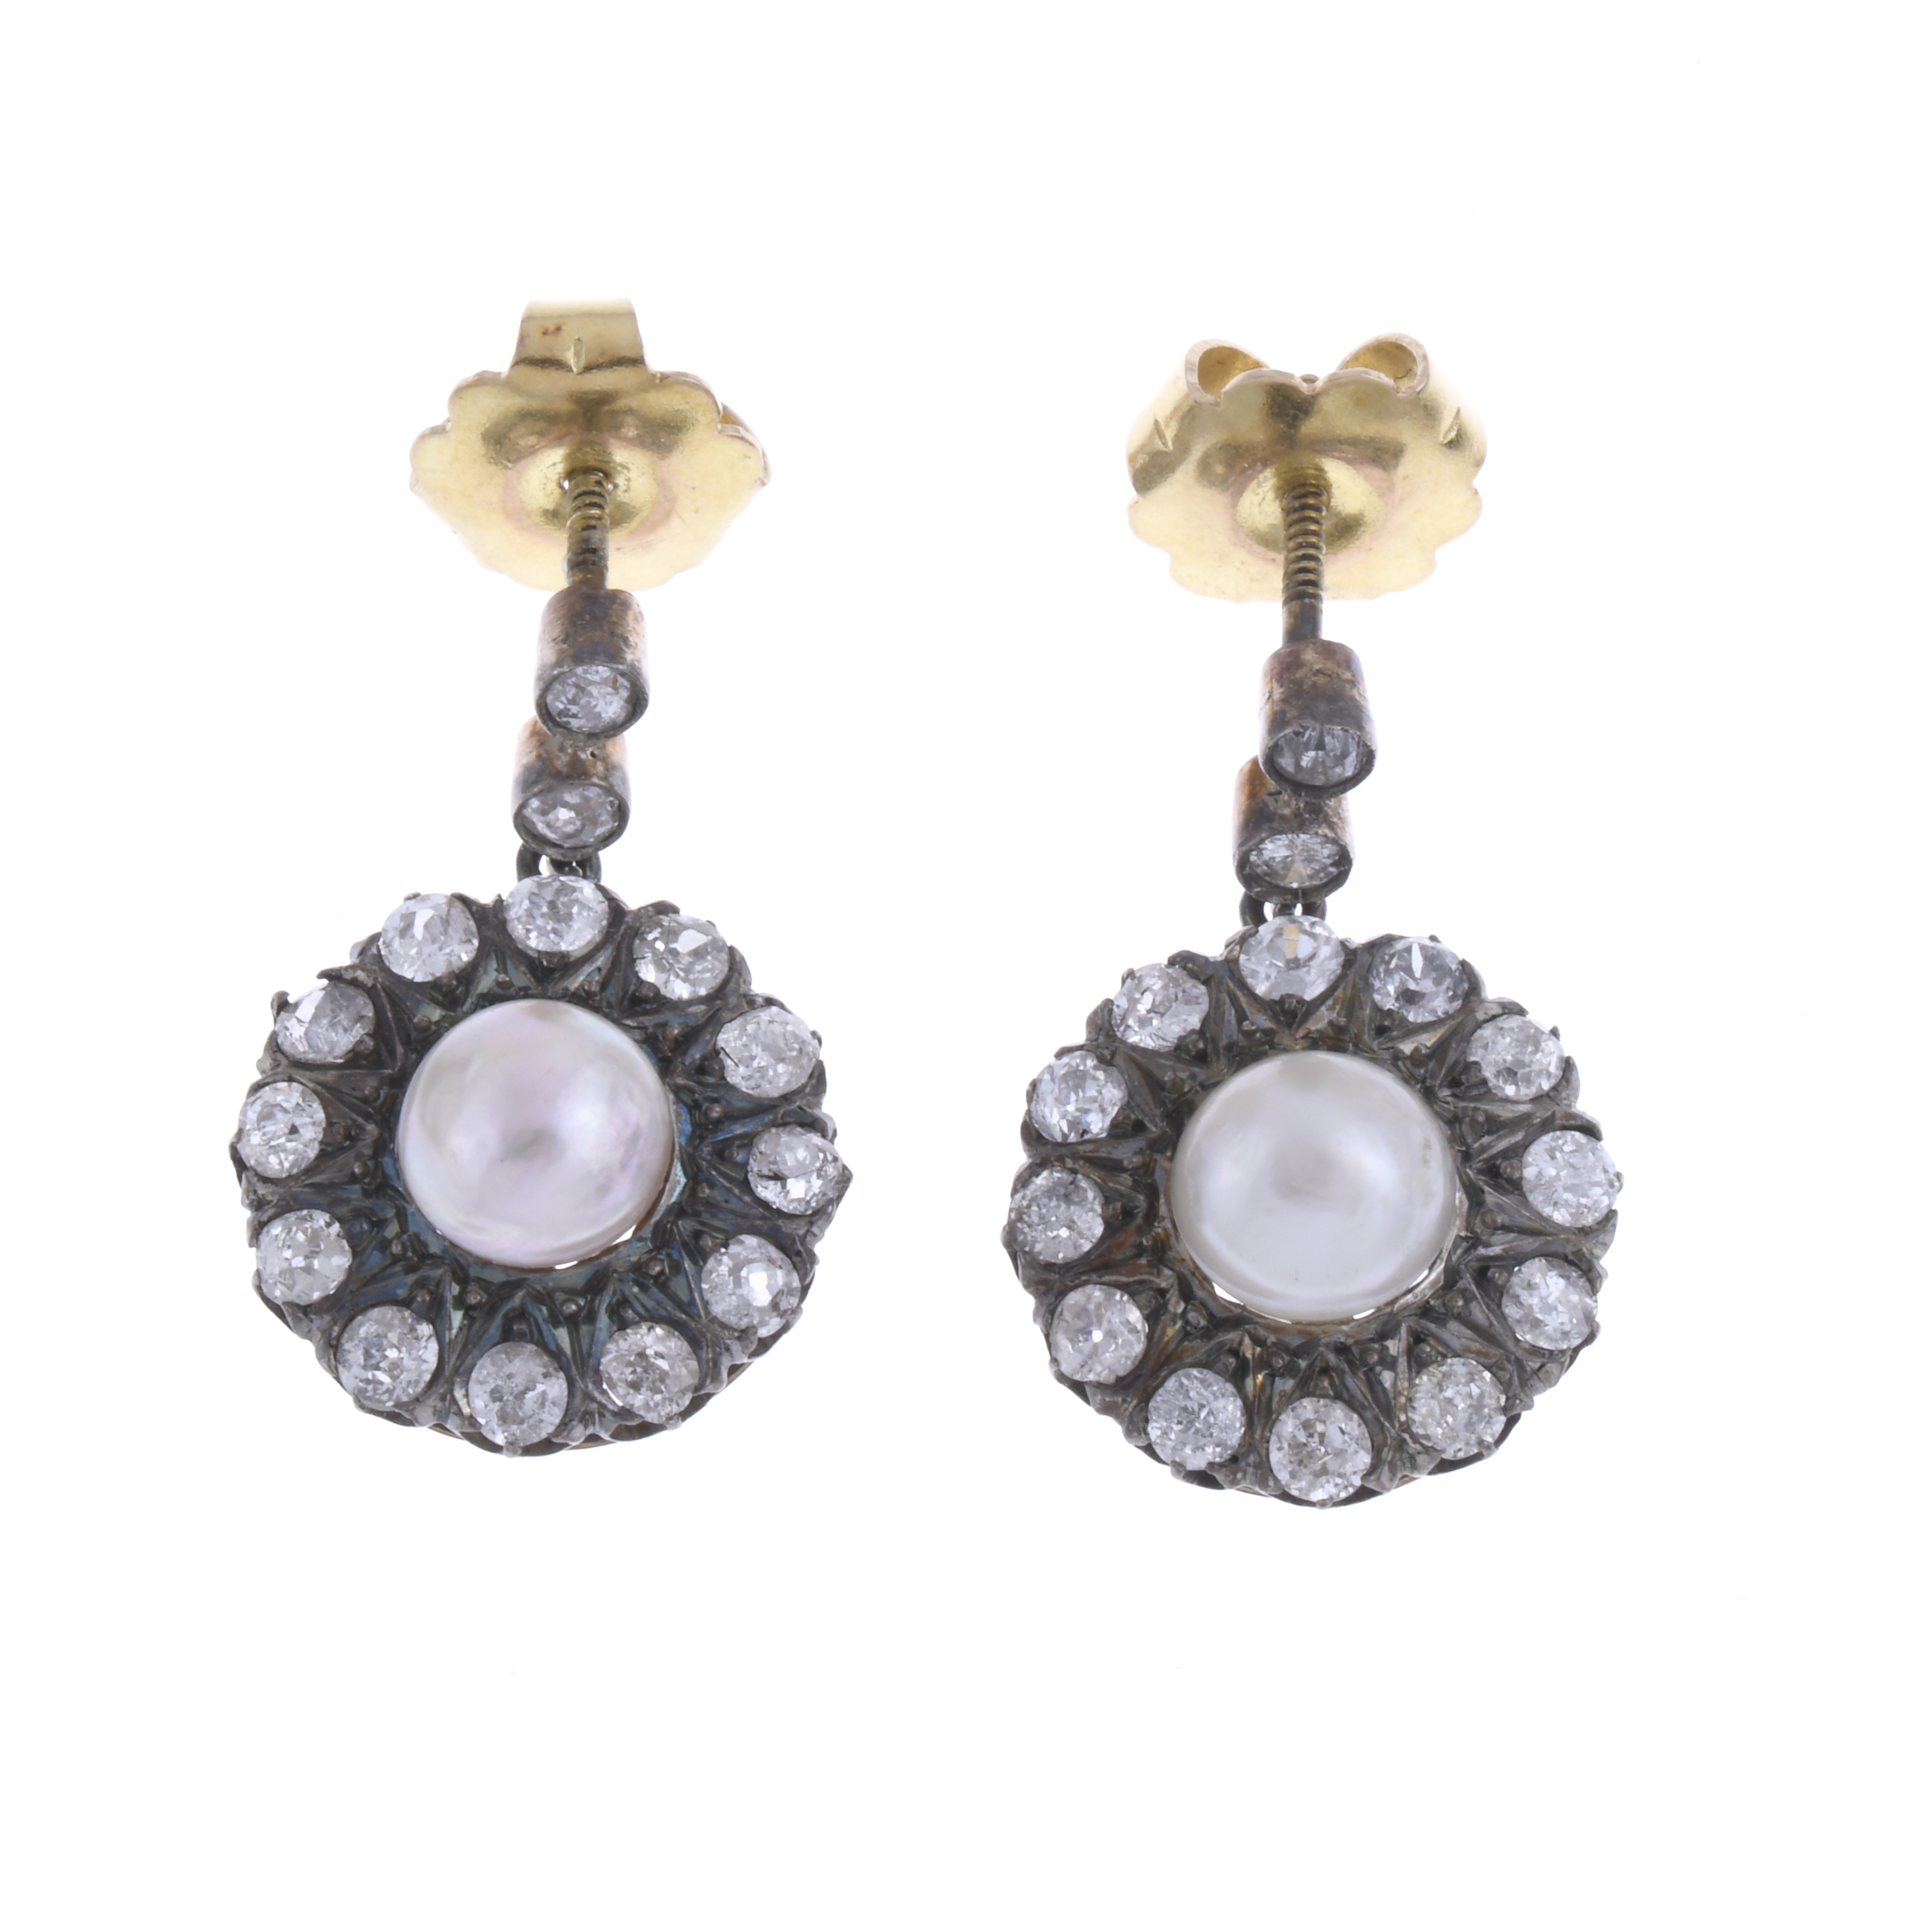 LONG ROSETTE EARRINGS WITH DIAMONDS AND PEARLS.